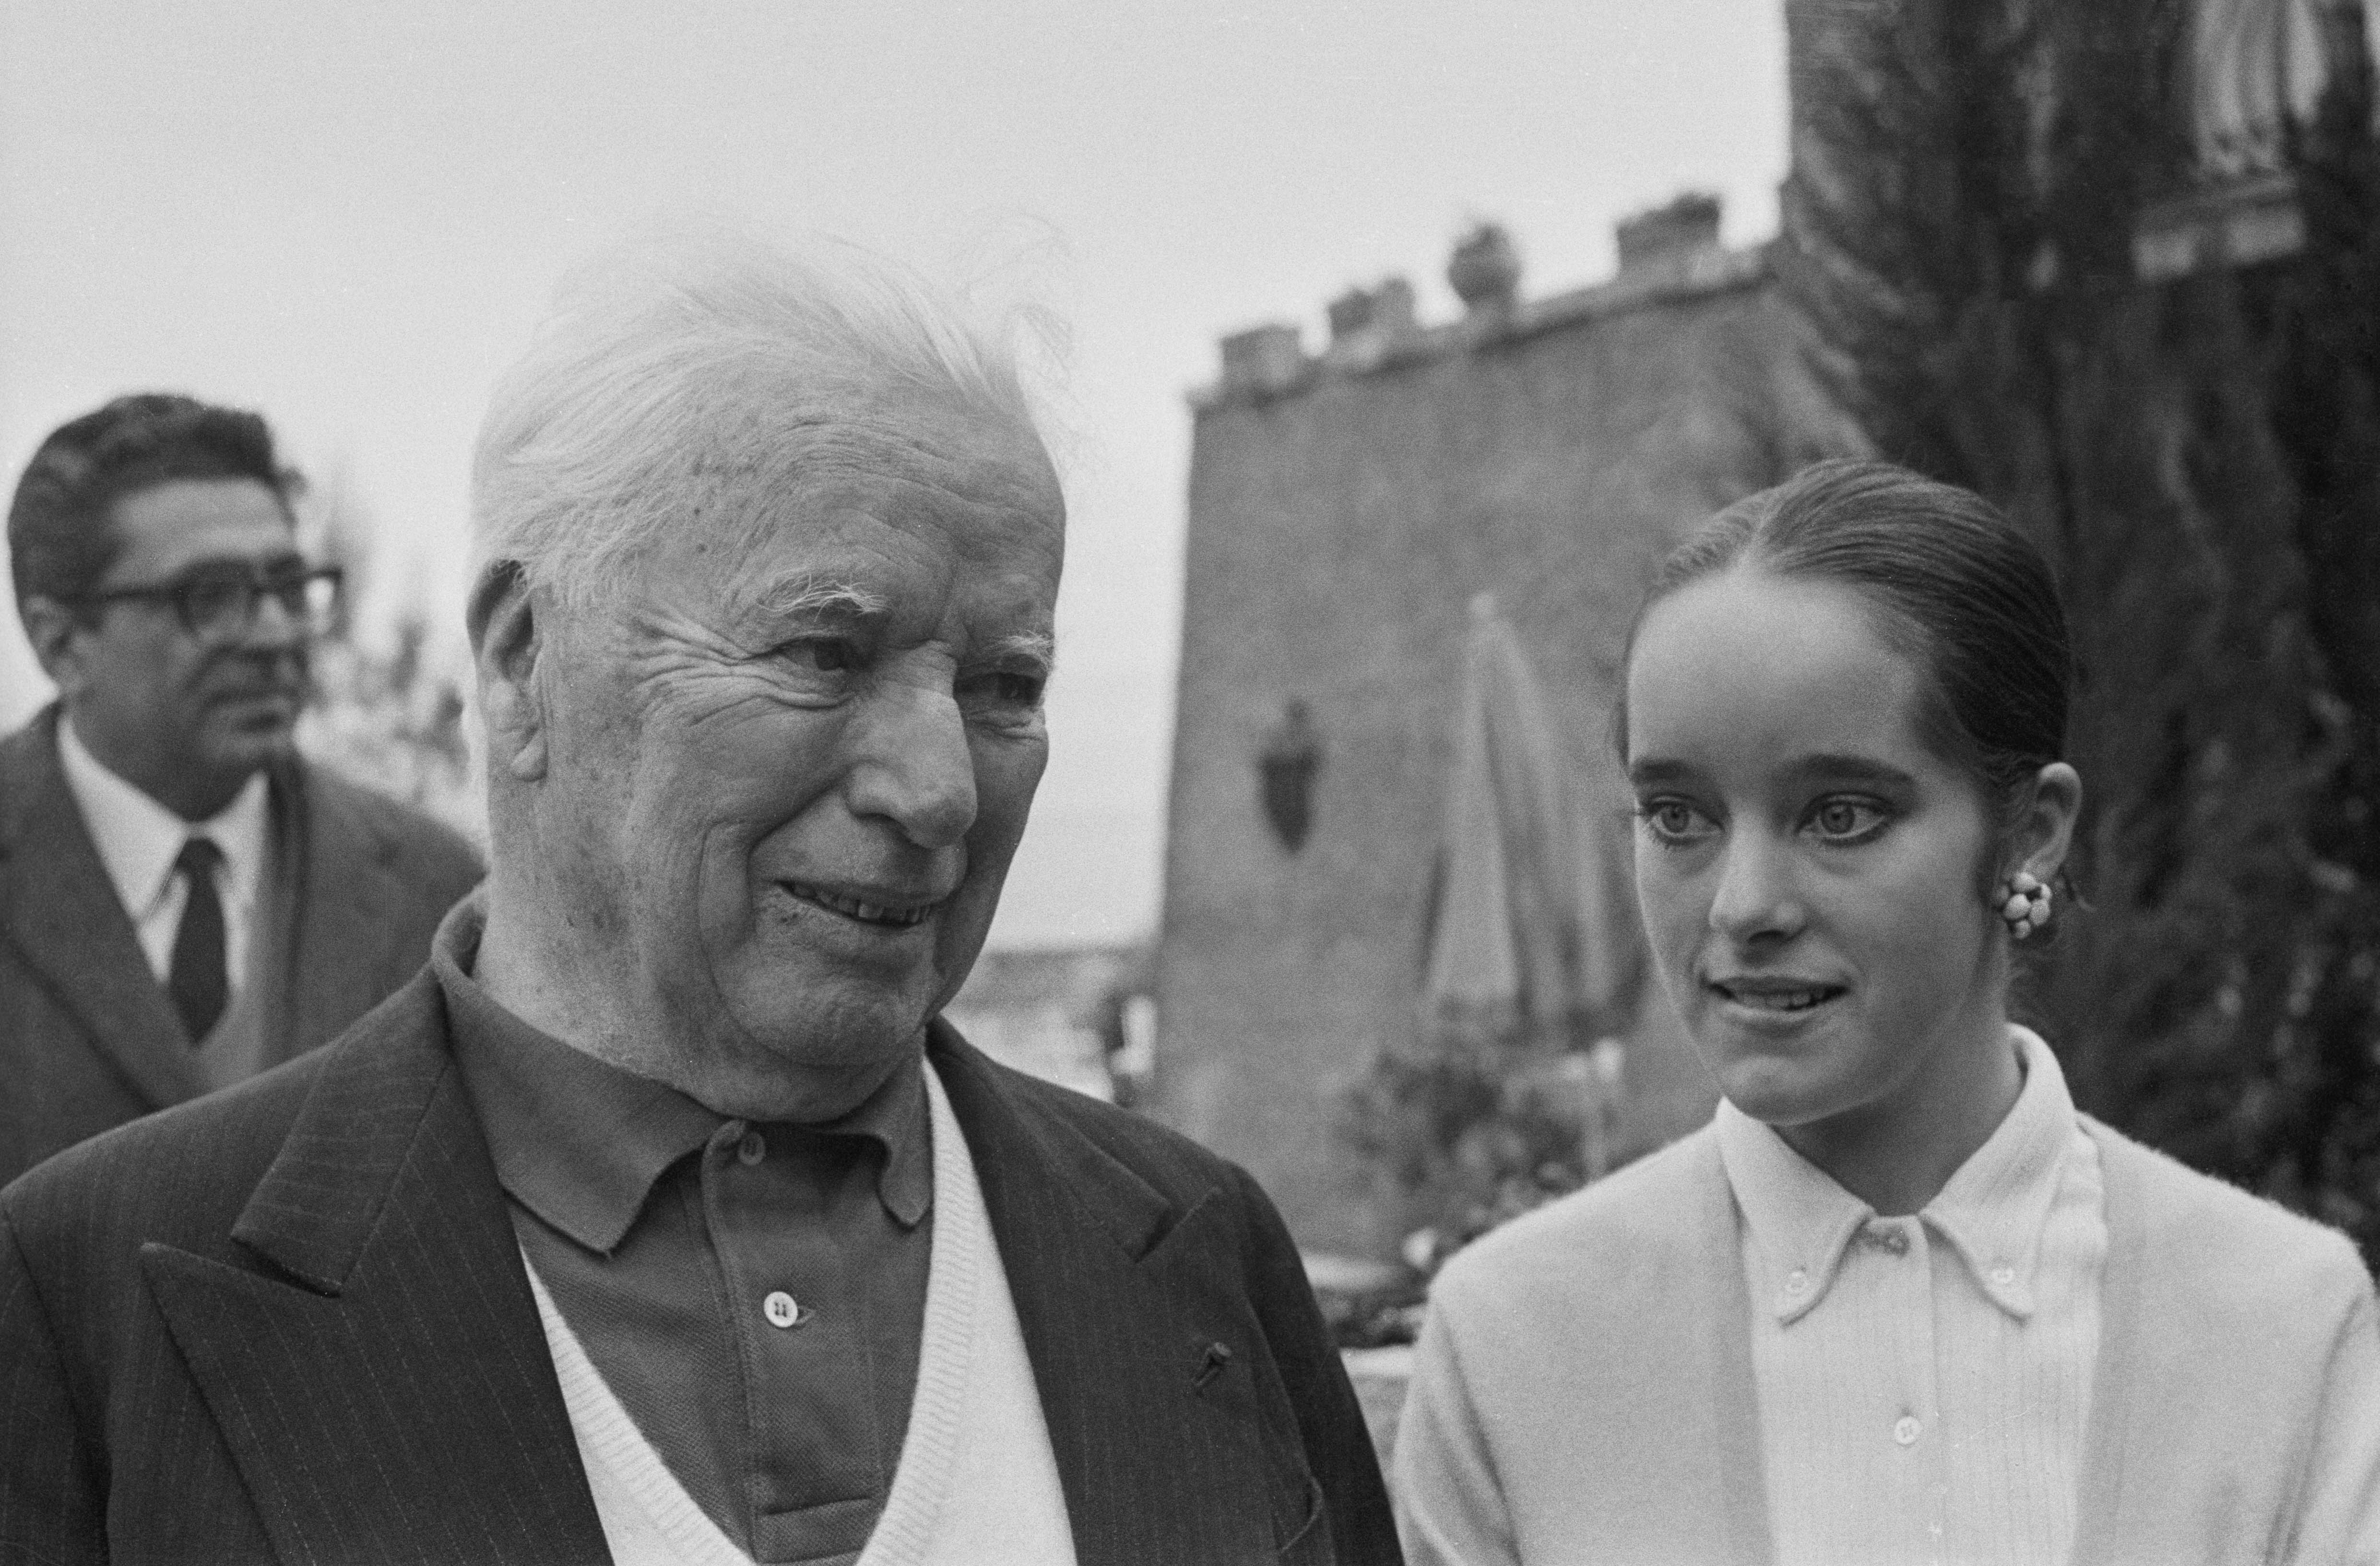 Charlie Chaplin and his daughter Victoria on vacation in Italy on April 1, 1967 | Source: Getty Images